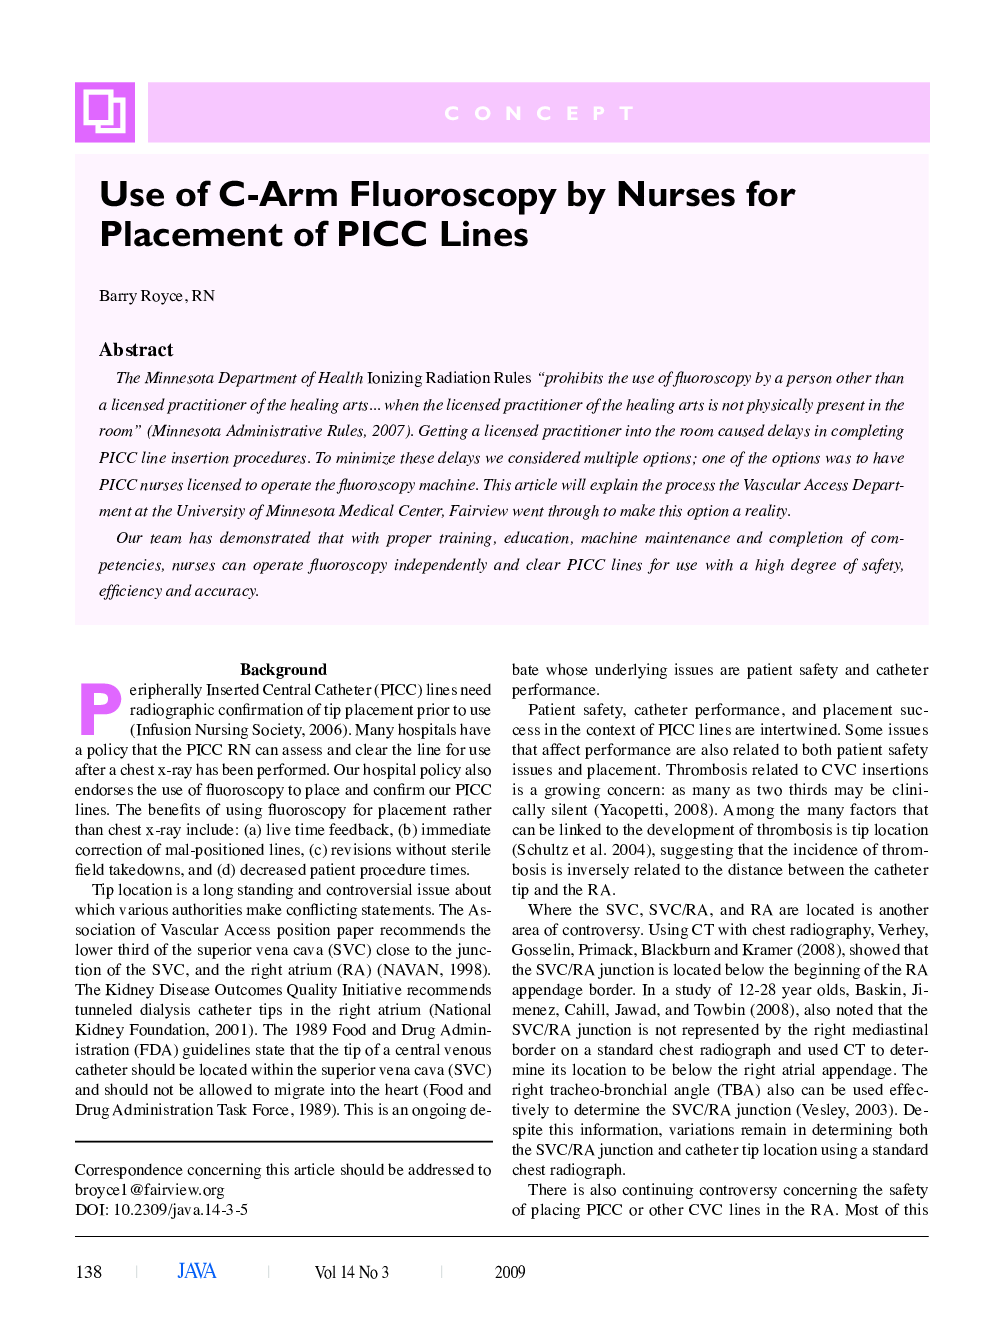 Use of C-Arm Fluoroscopy by Nurses for Placement of PICC Lines